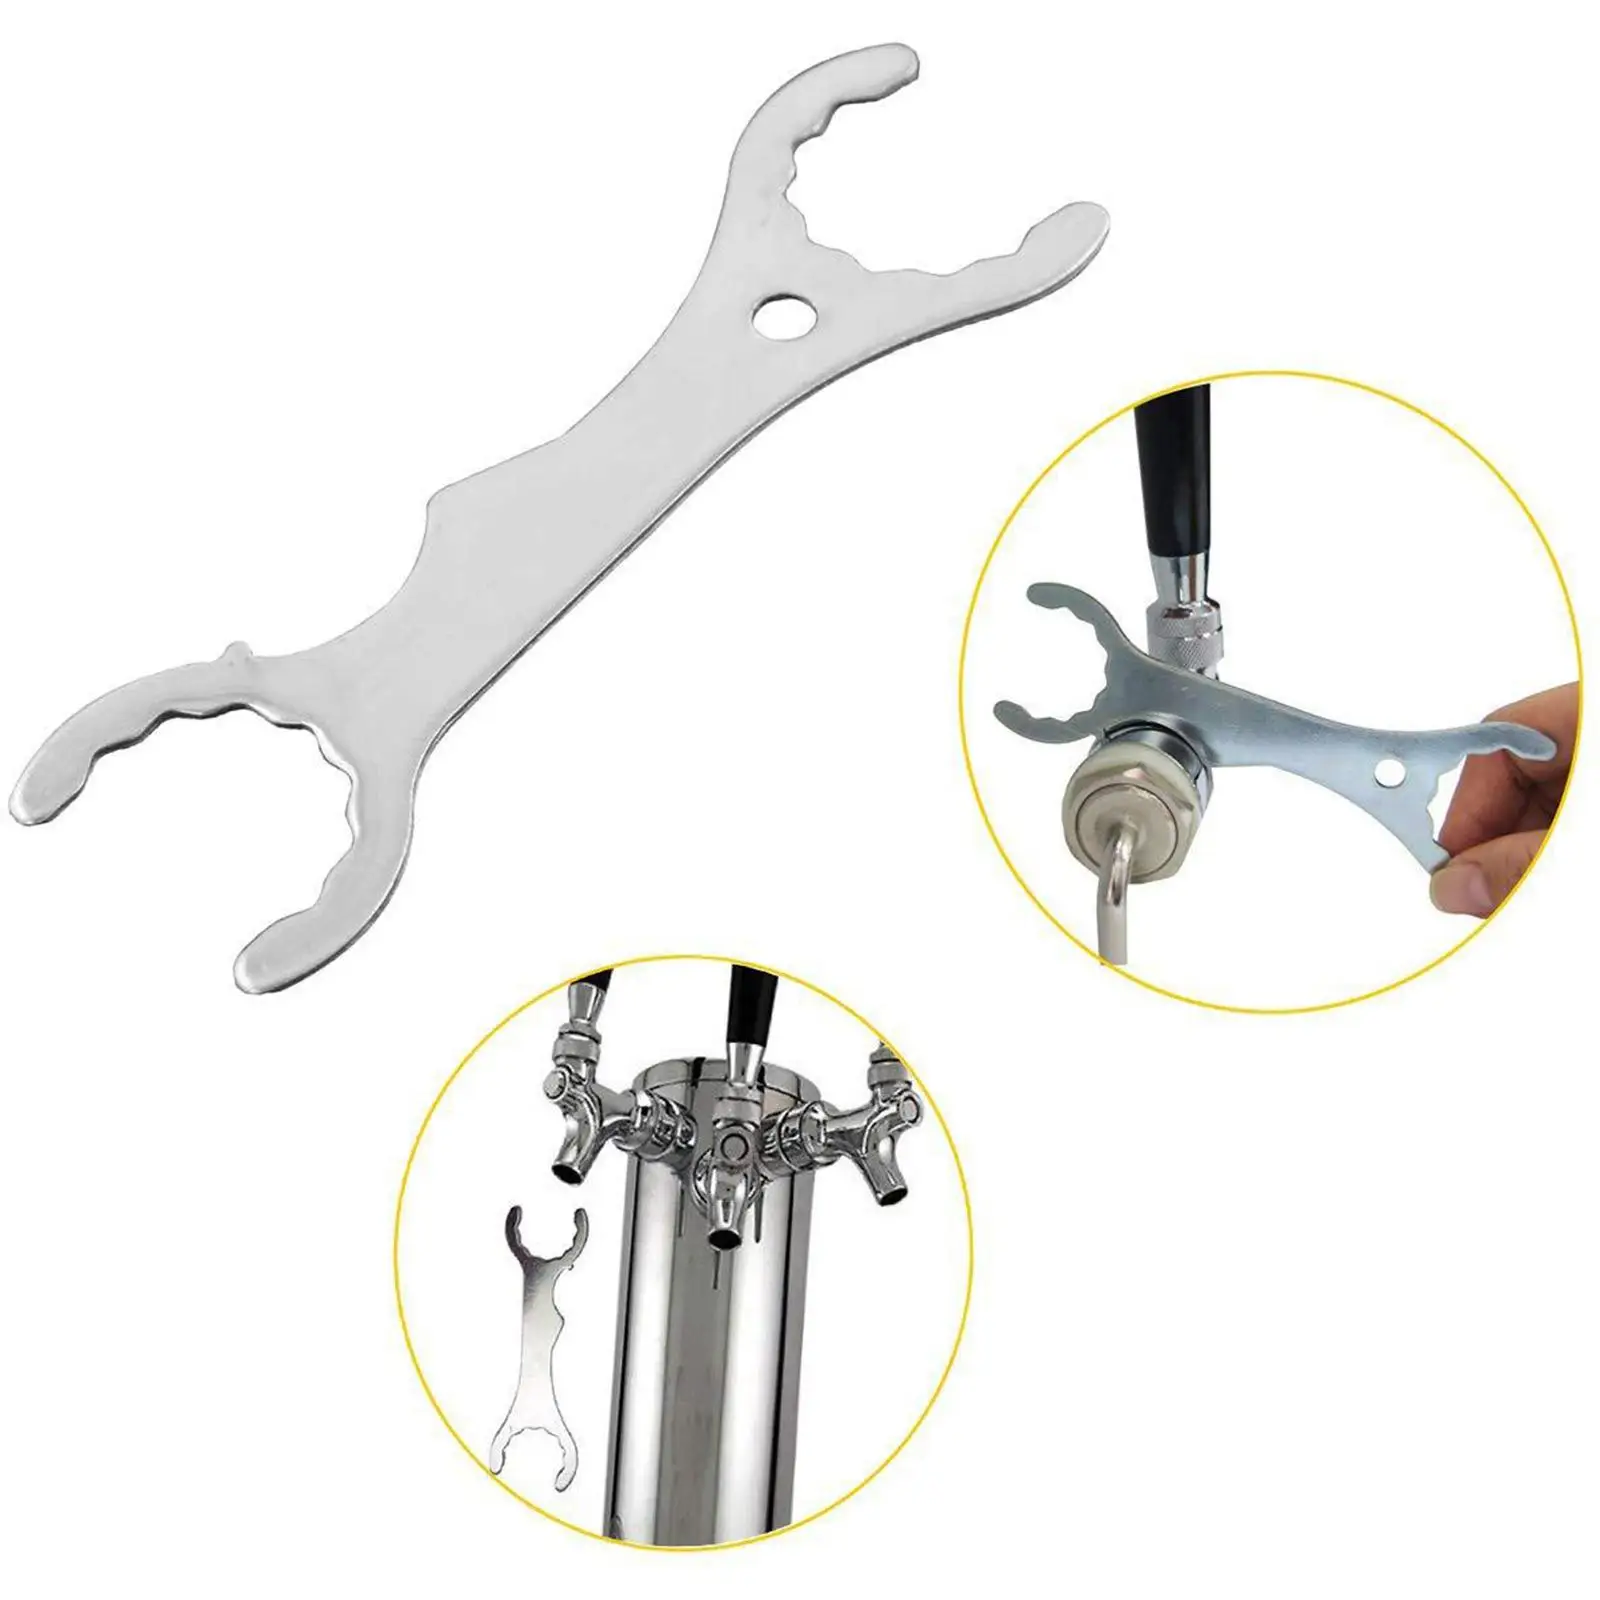 Beer Faucet Wrench Multi Use Stainless Steel Tightens Tower or Shank